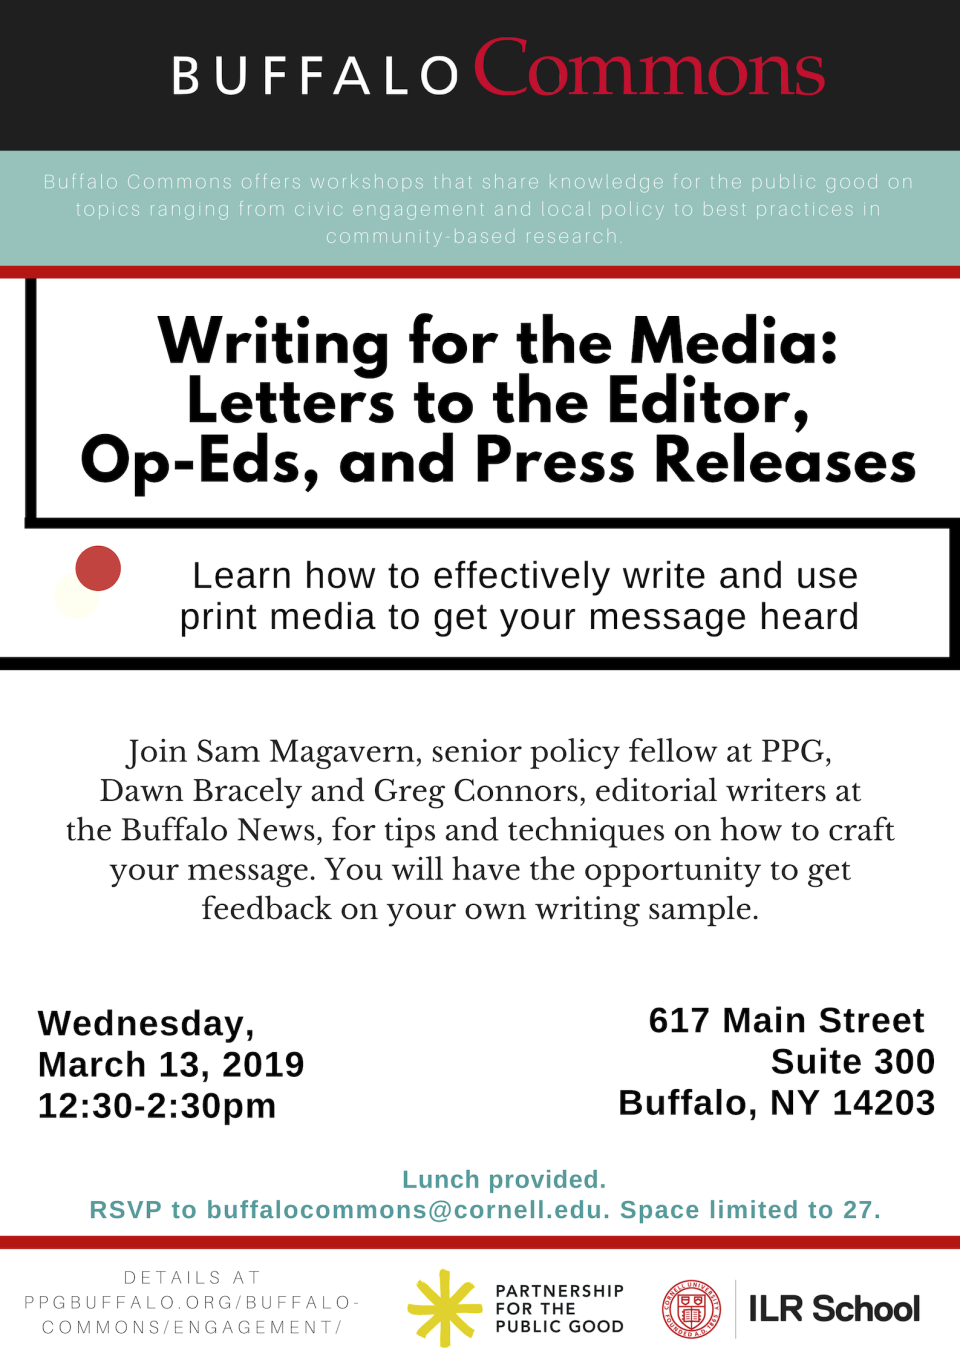 Writing for the Media: Letters to the Editor, Op-Eds, and Press Releases